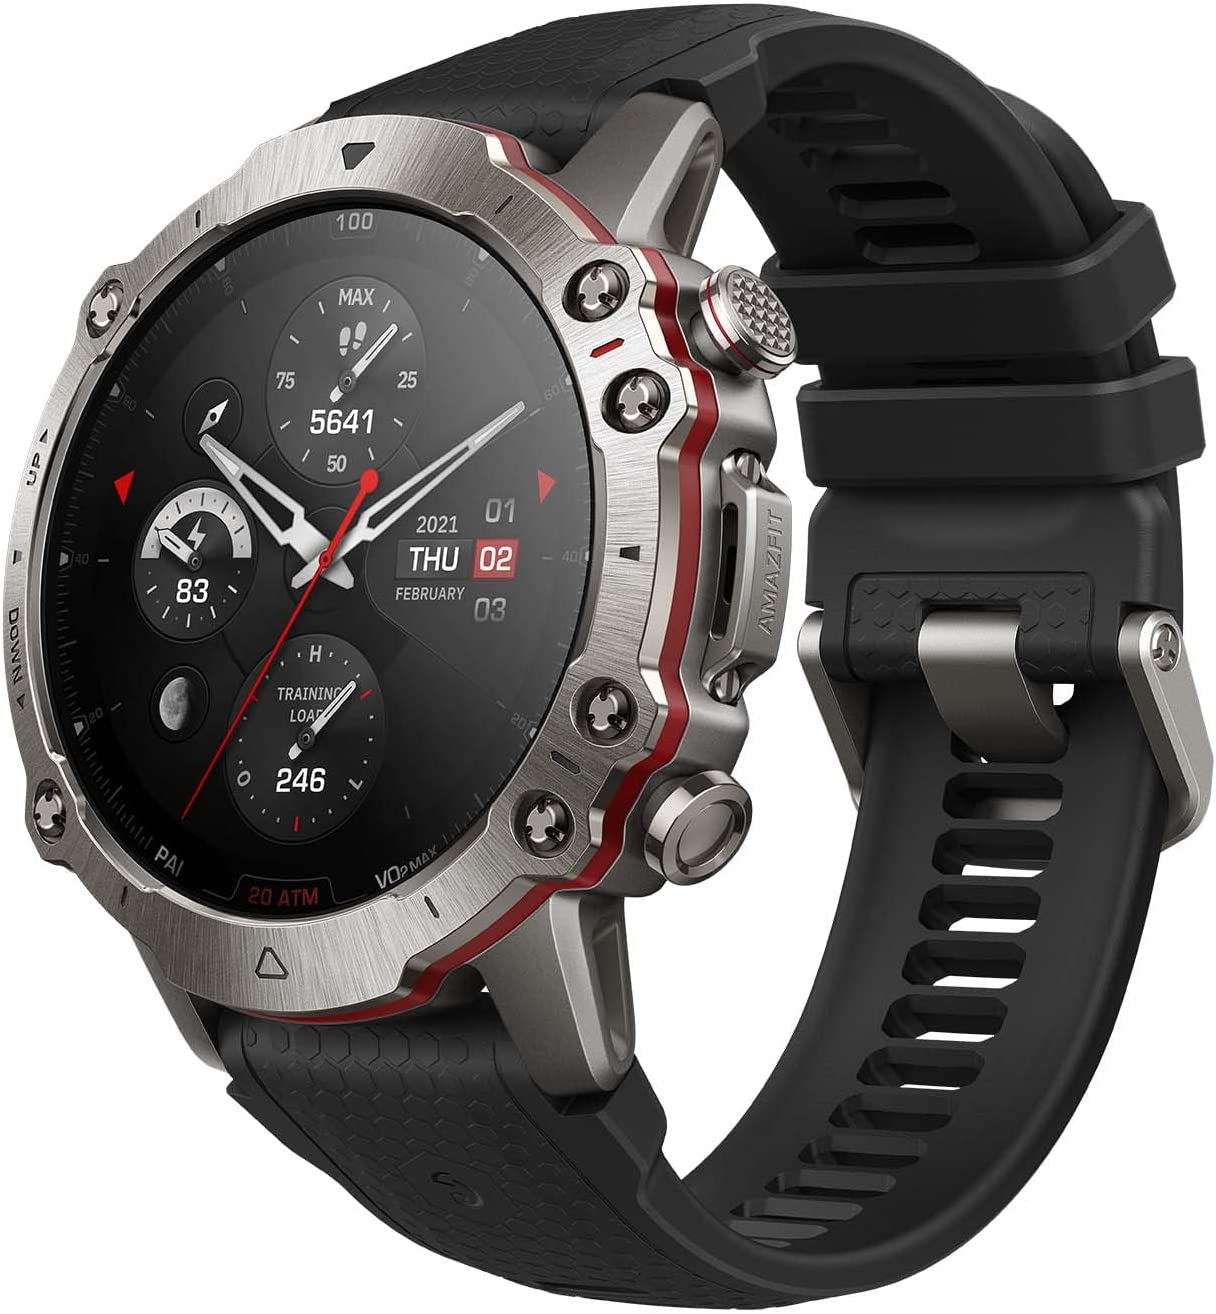 Amazfit Falcon Military-Grade Smart Watch for Men, Dual-Band & 6 Satellite Positioning, Multi-Sport GPS Watch, Strength Training, Titanium Body, 150+ Sports Modes, 200m Water-Resistance